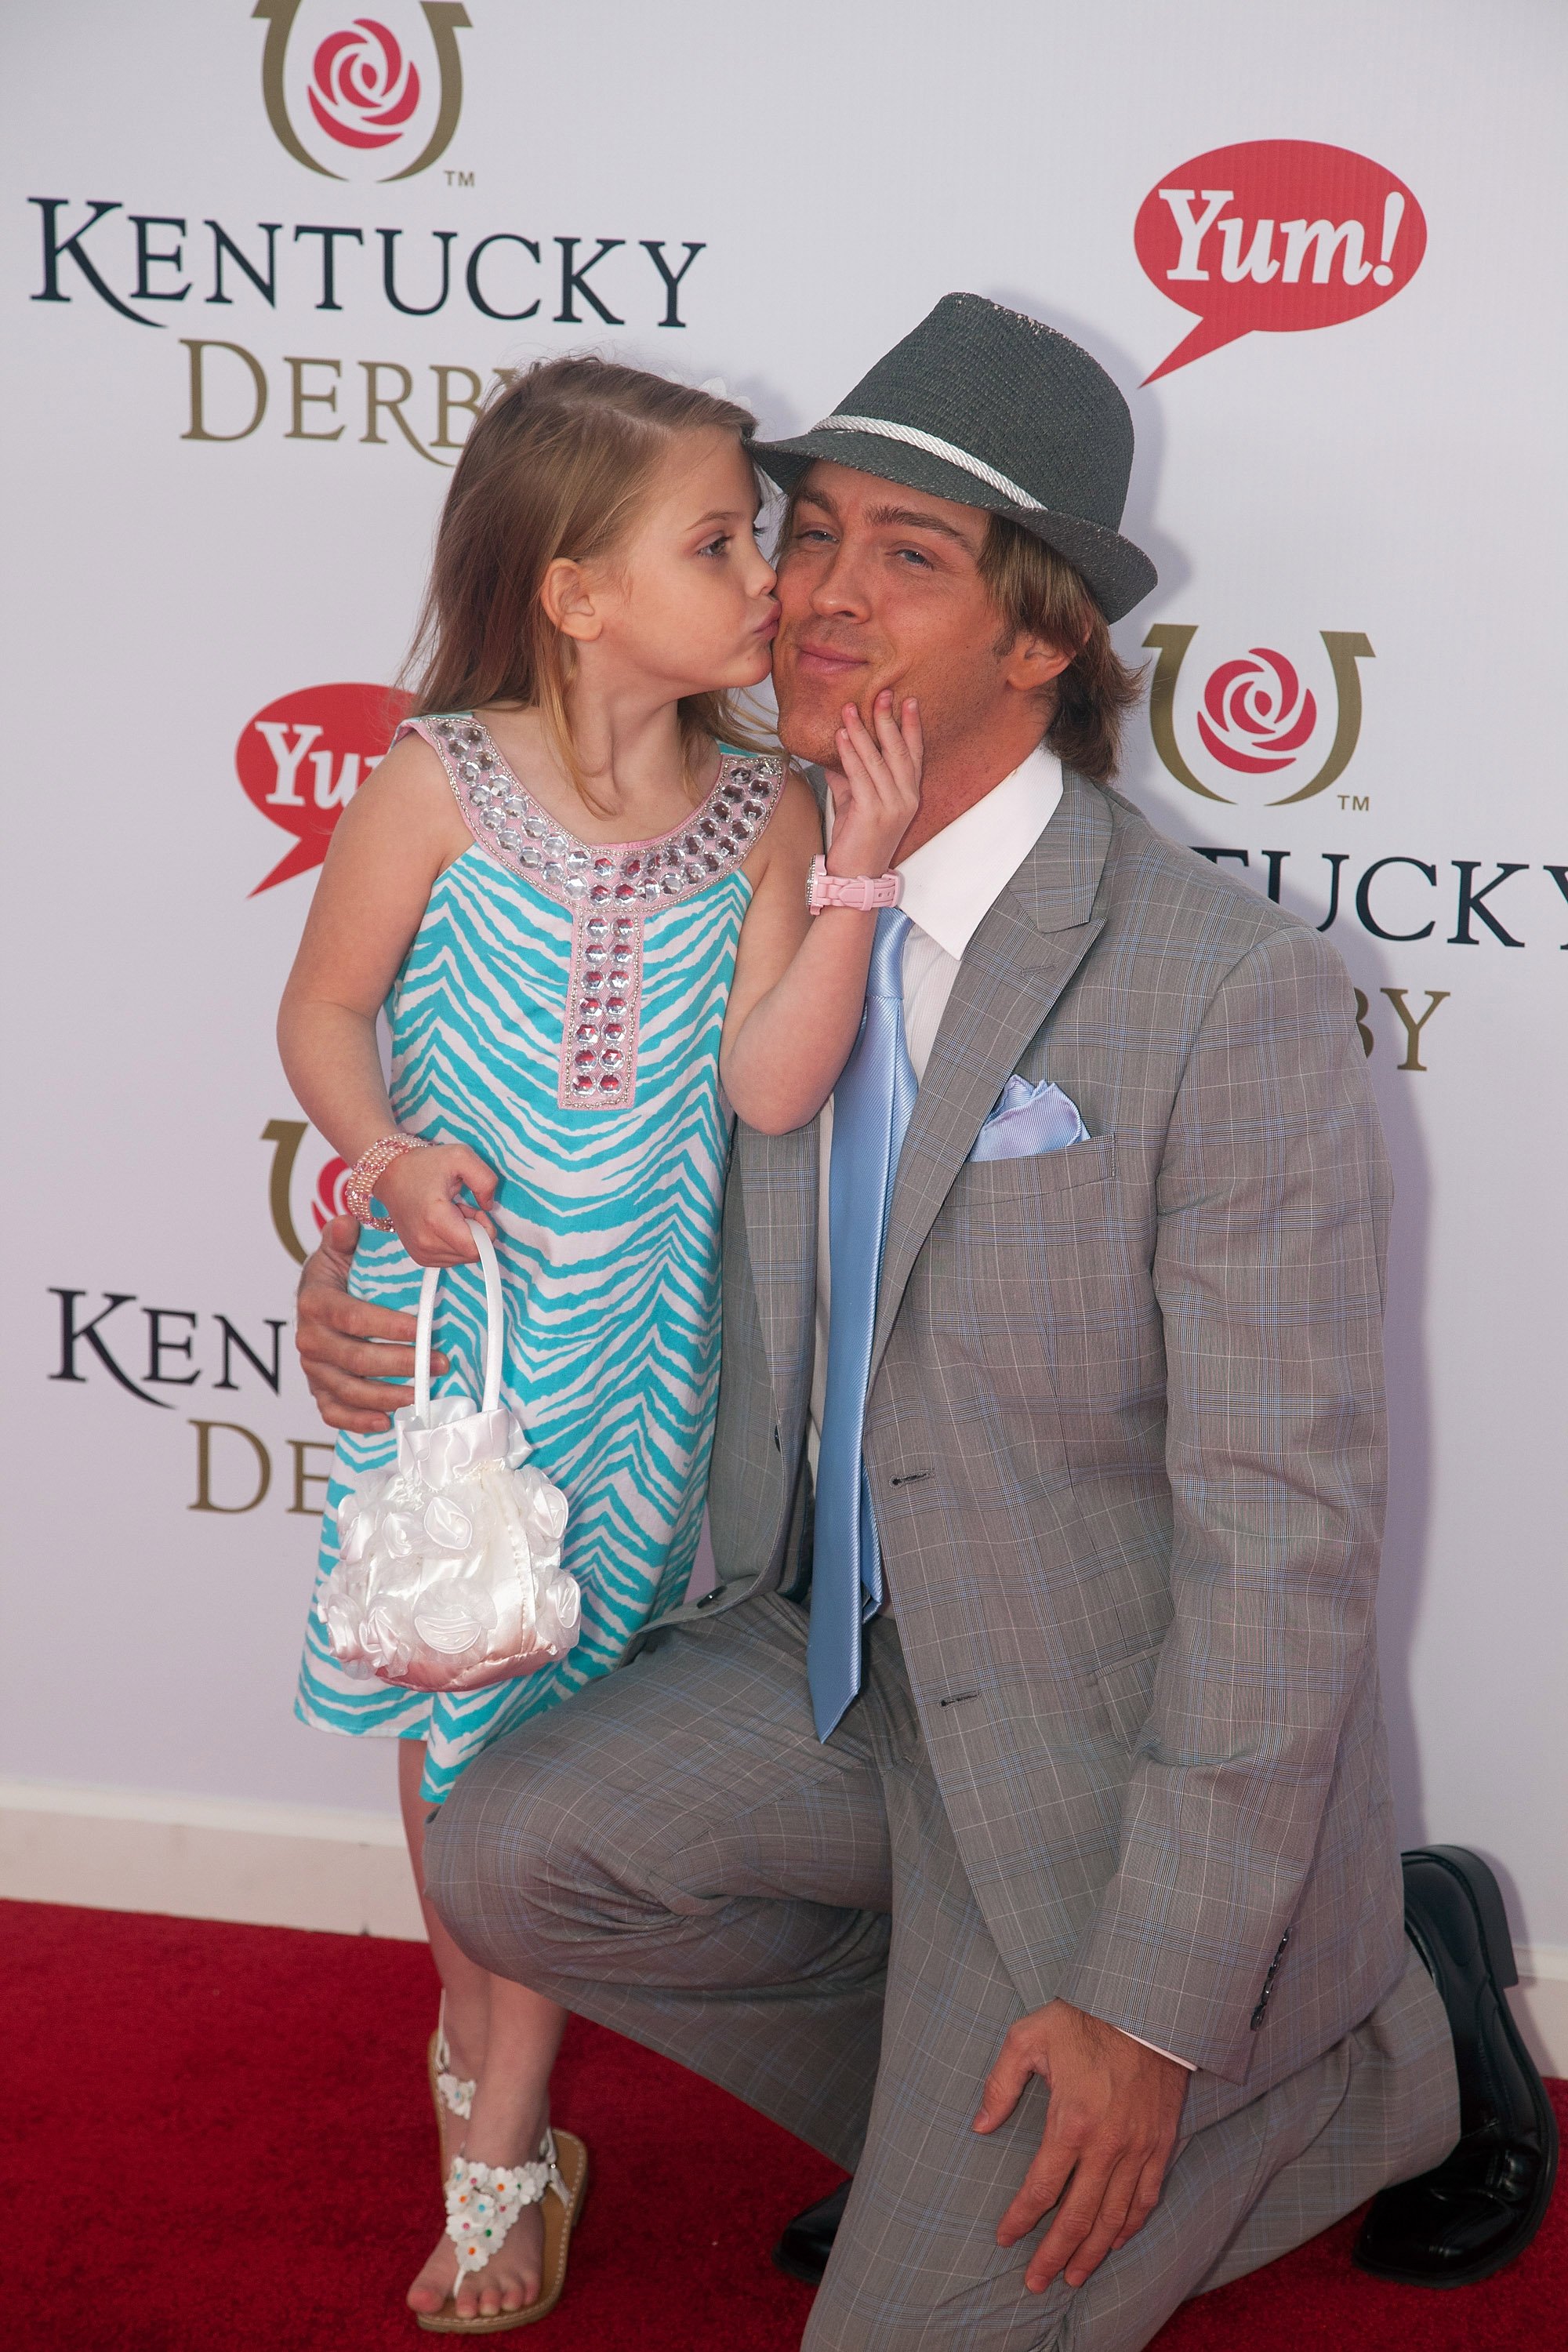 Dannielynn and Larry Birkhead during the 137th Kentucky Derby at Churchill Downs on May 7, 2011, in Louisville, Kentucky. | Source: Getty Images